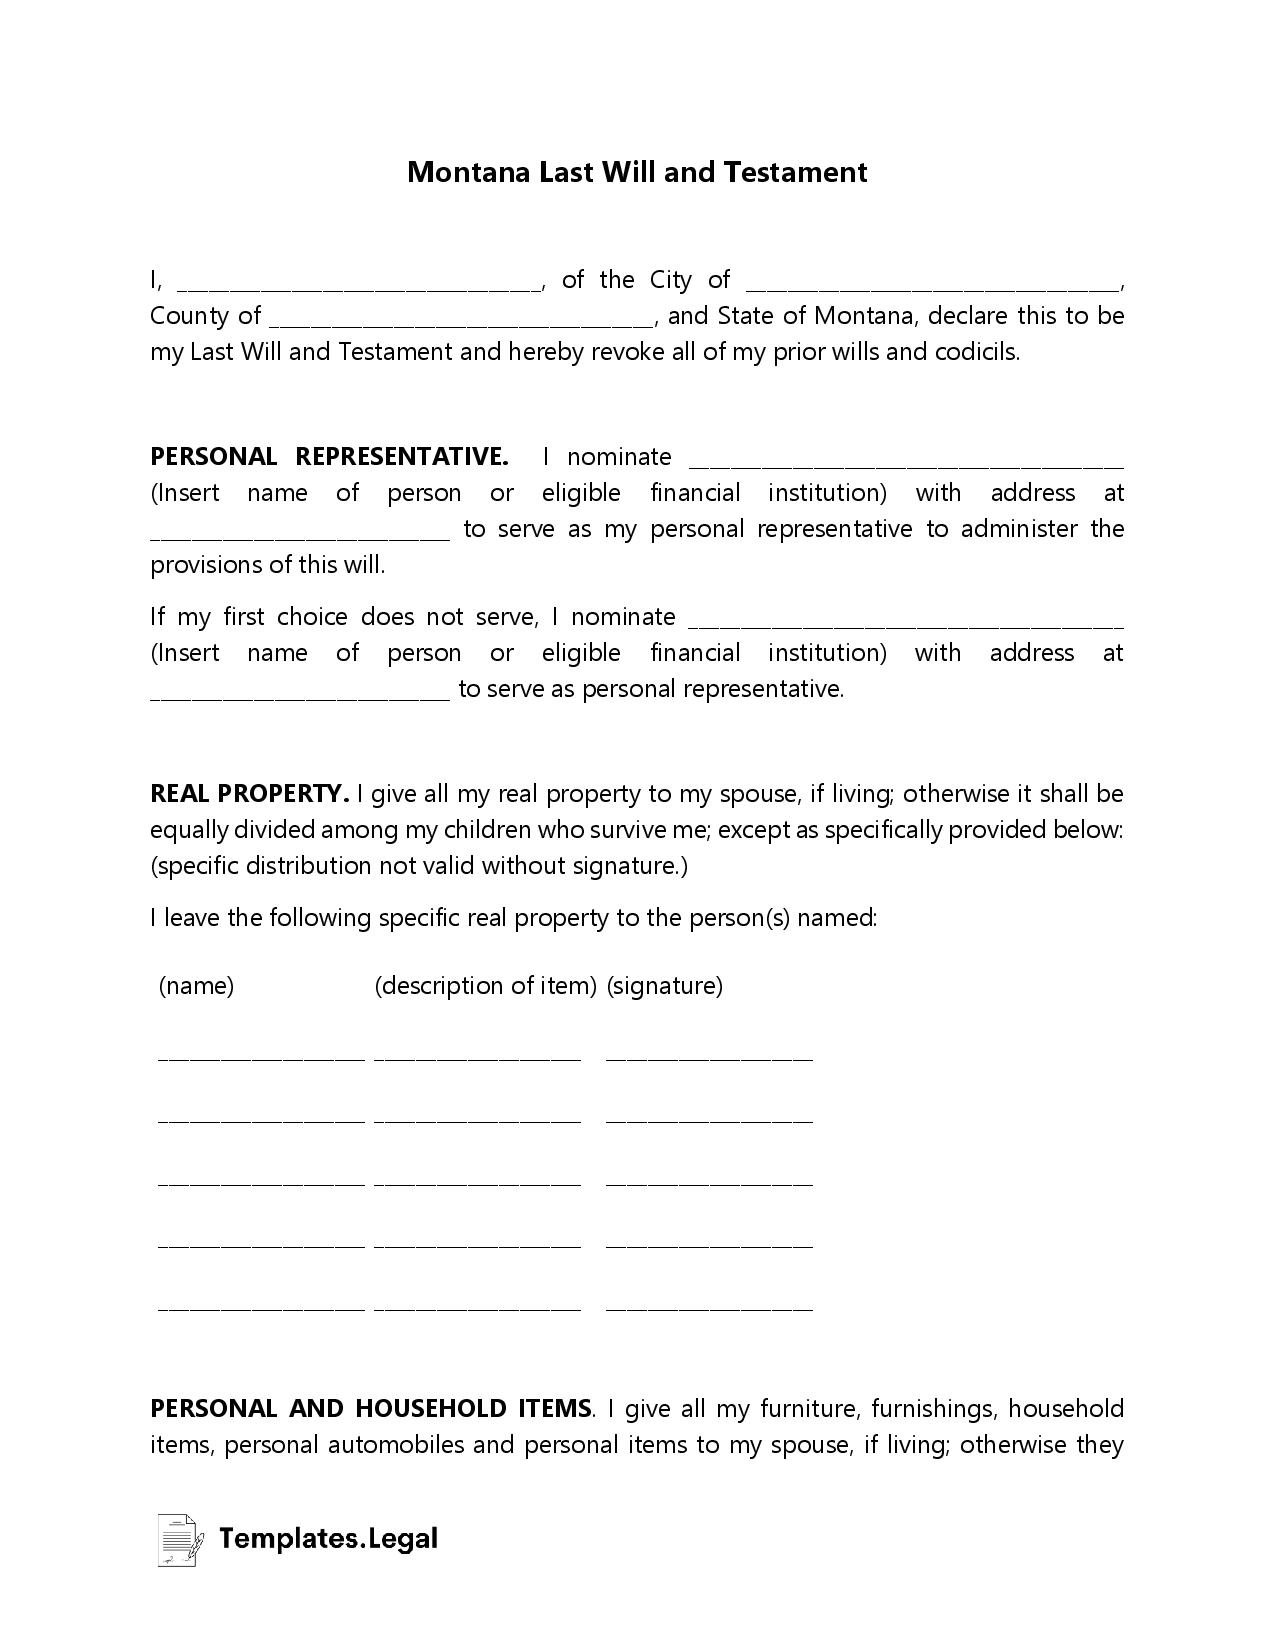 Montana Last Will and Testament - Templates.Legal